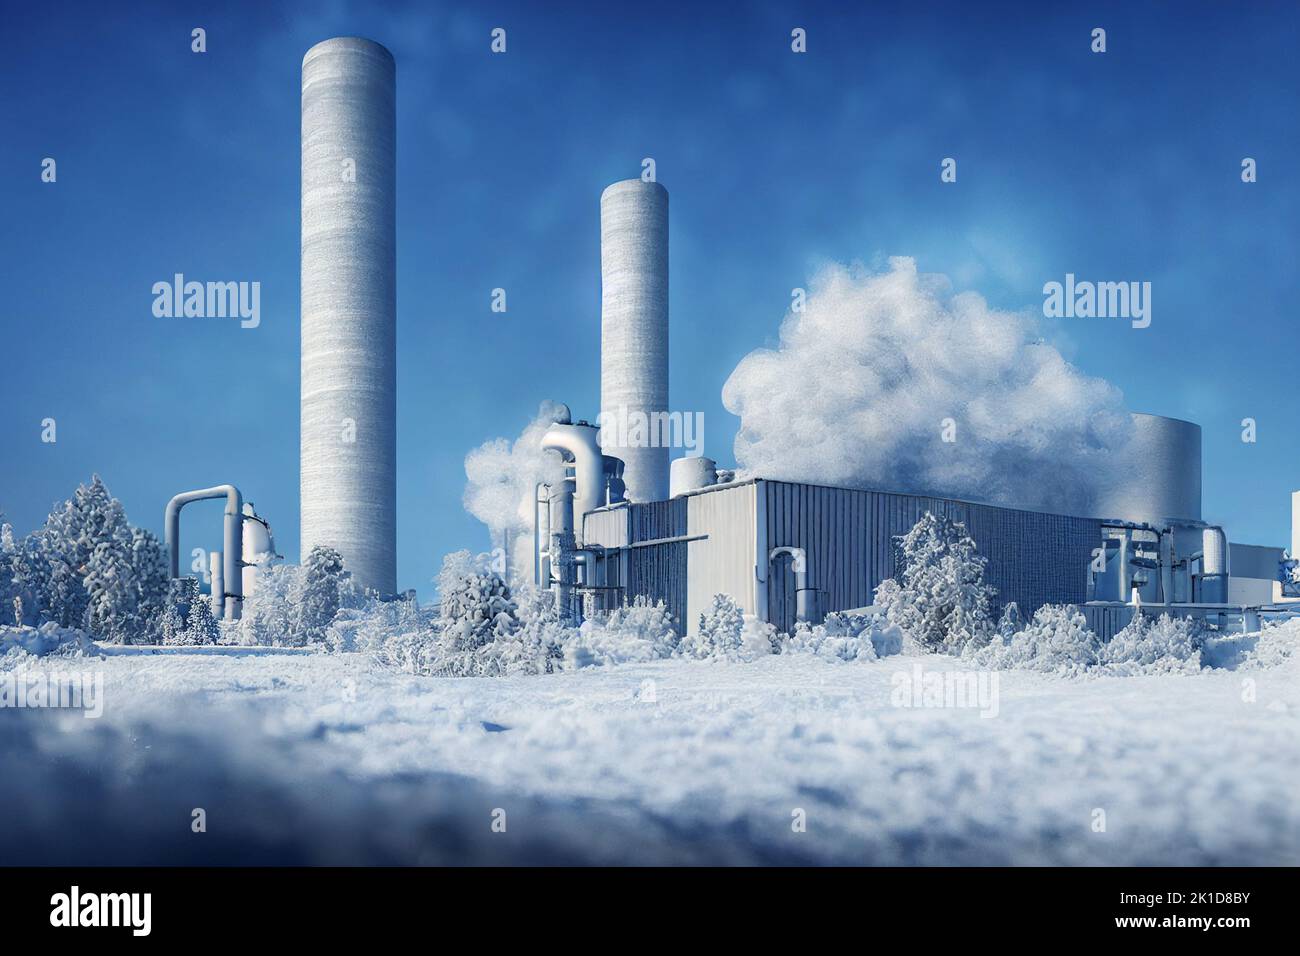 The electric thermal plant in winter, Digital Generate Image Stock Photo